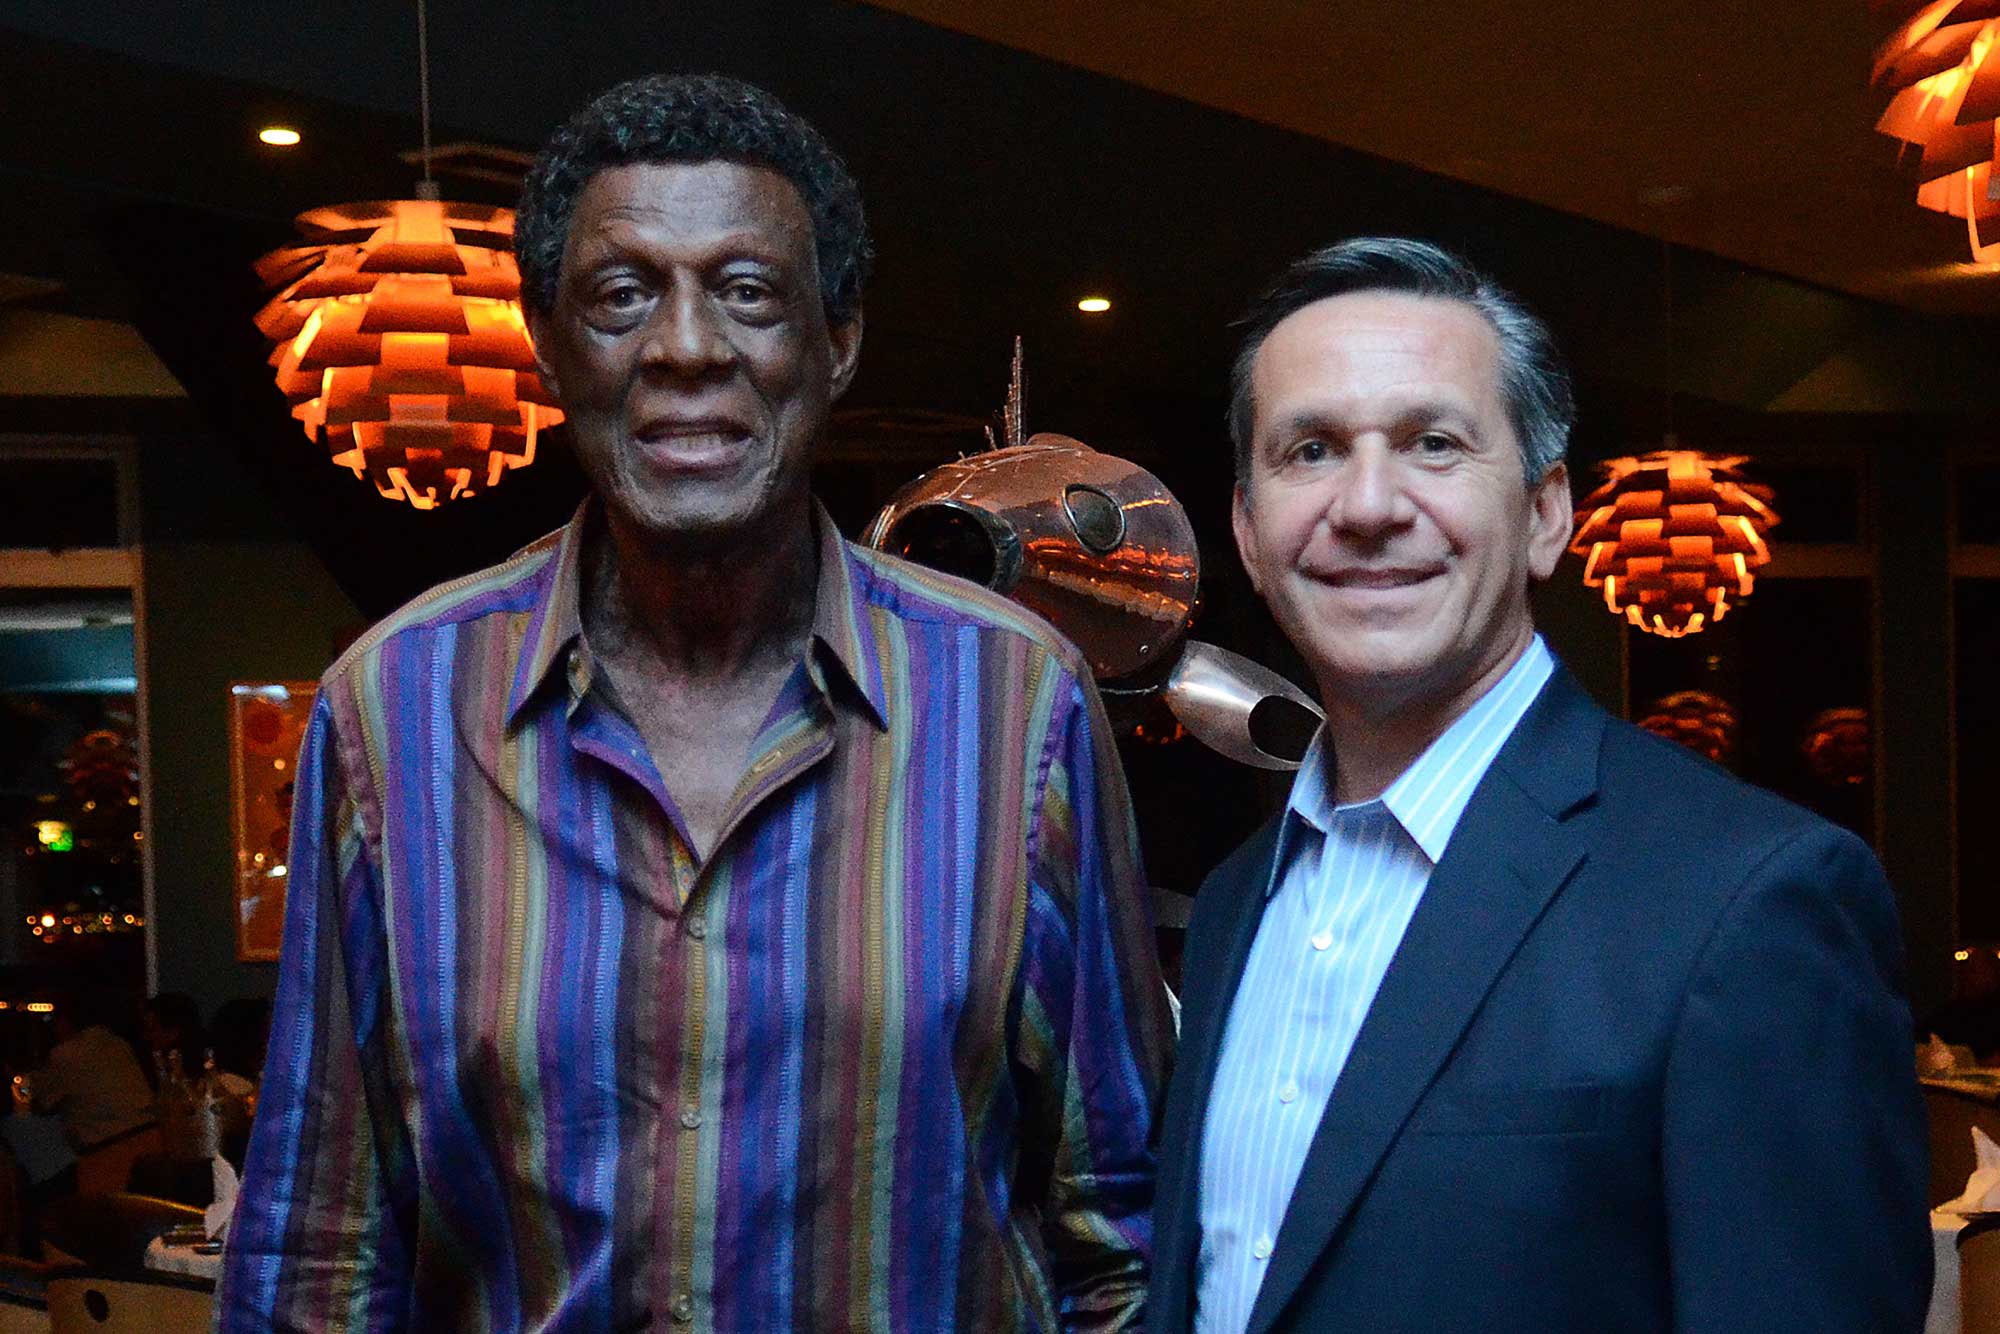 Seattle University Alums Elgin Baylor and Dino Rossi